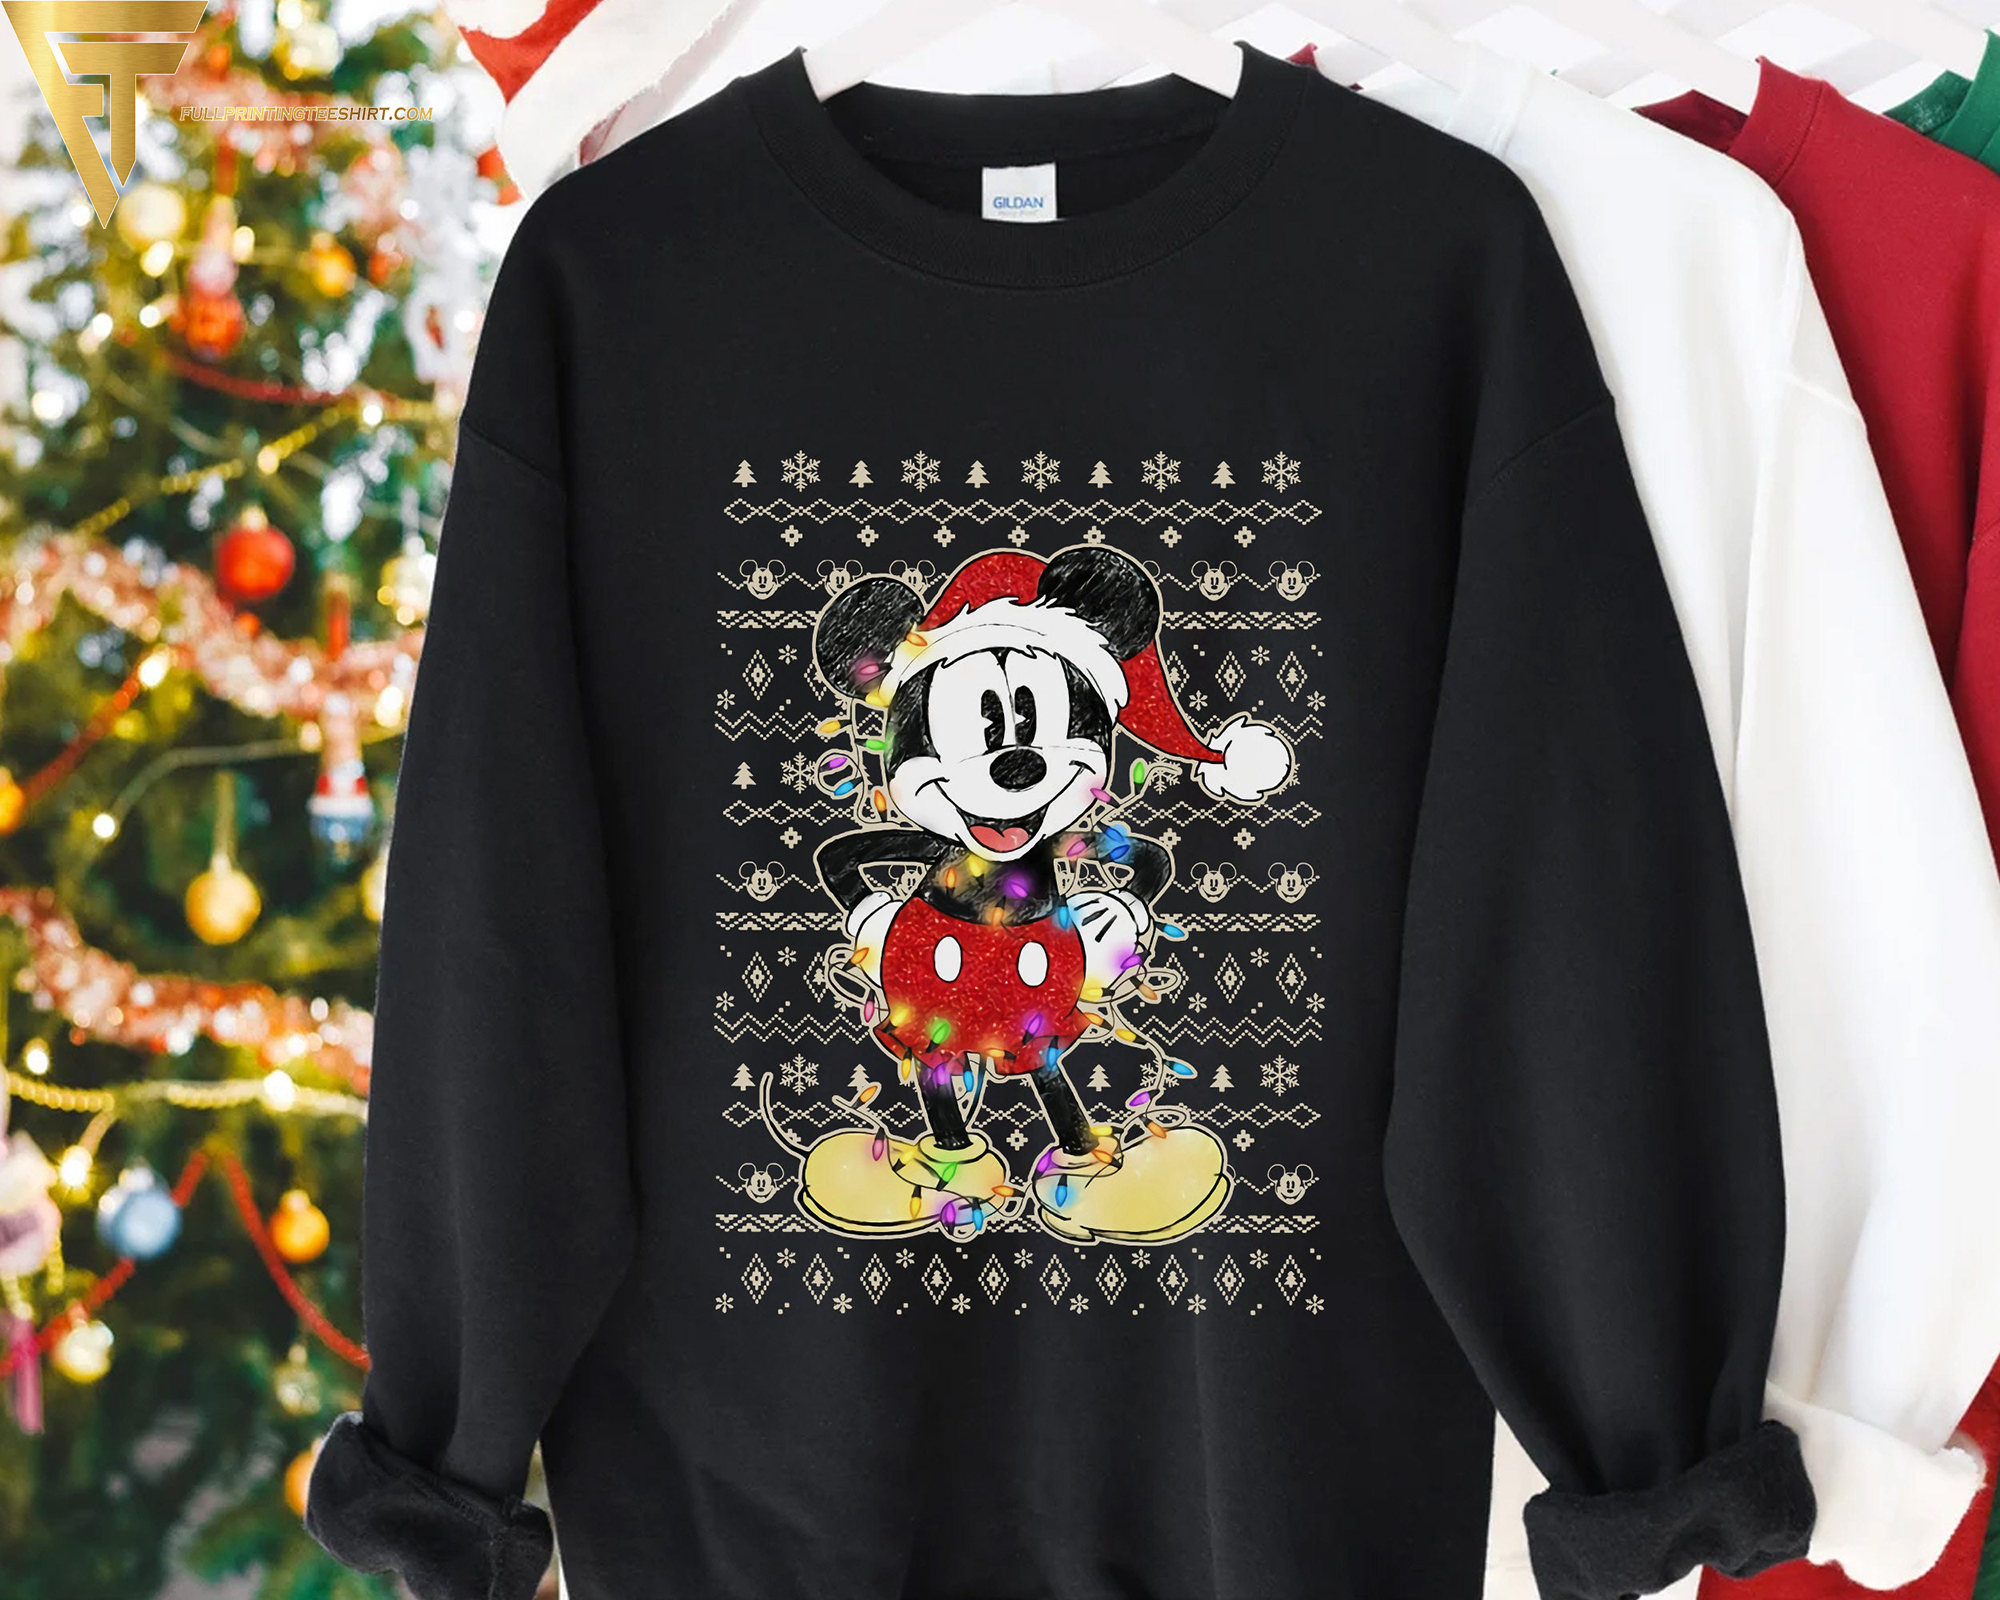 Mickey Mouse Christmas Sweater The Ultimate Festive Fashion Statement for the Holidays